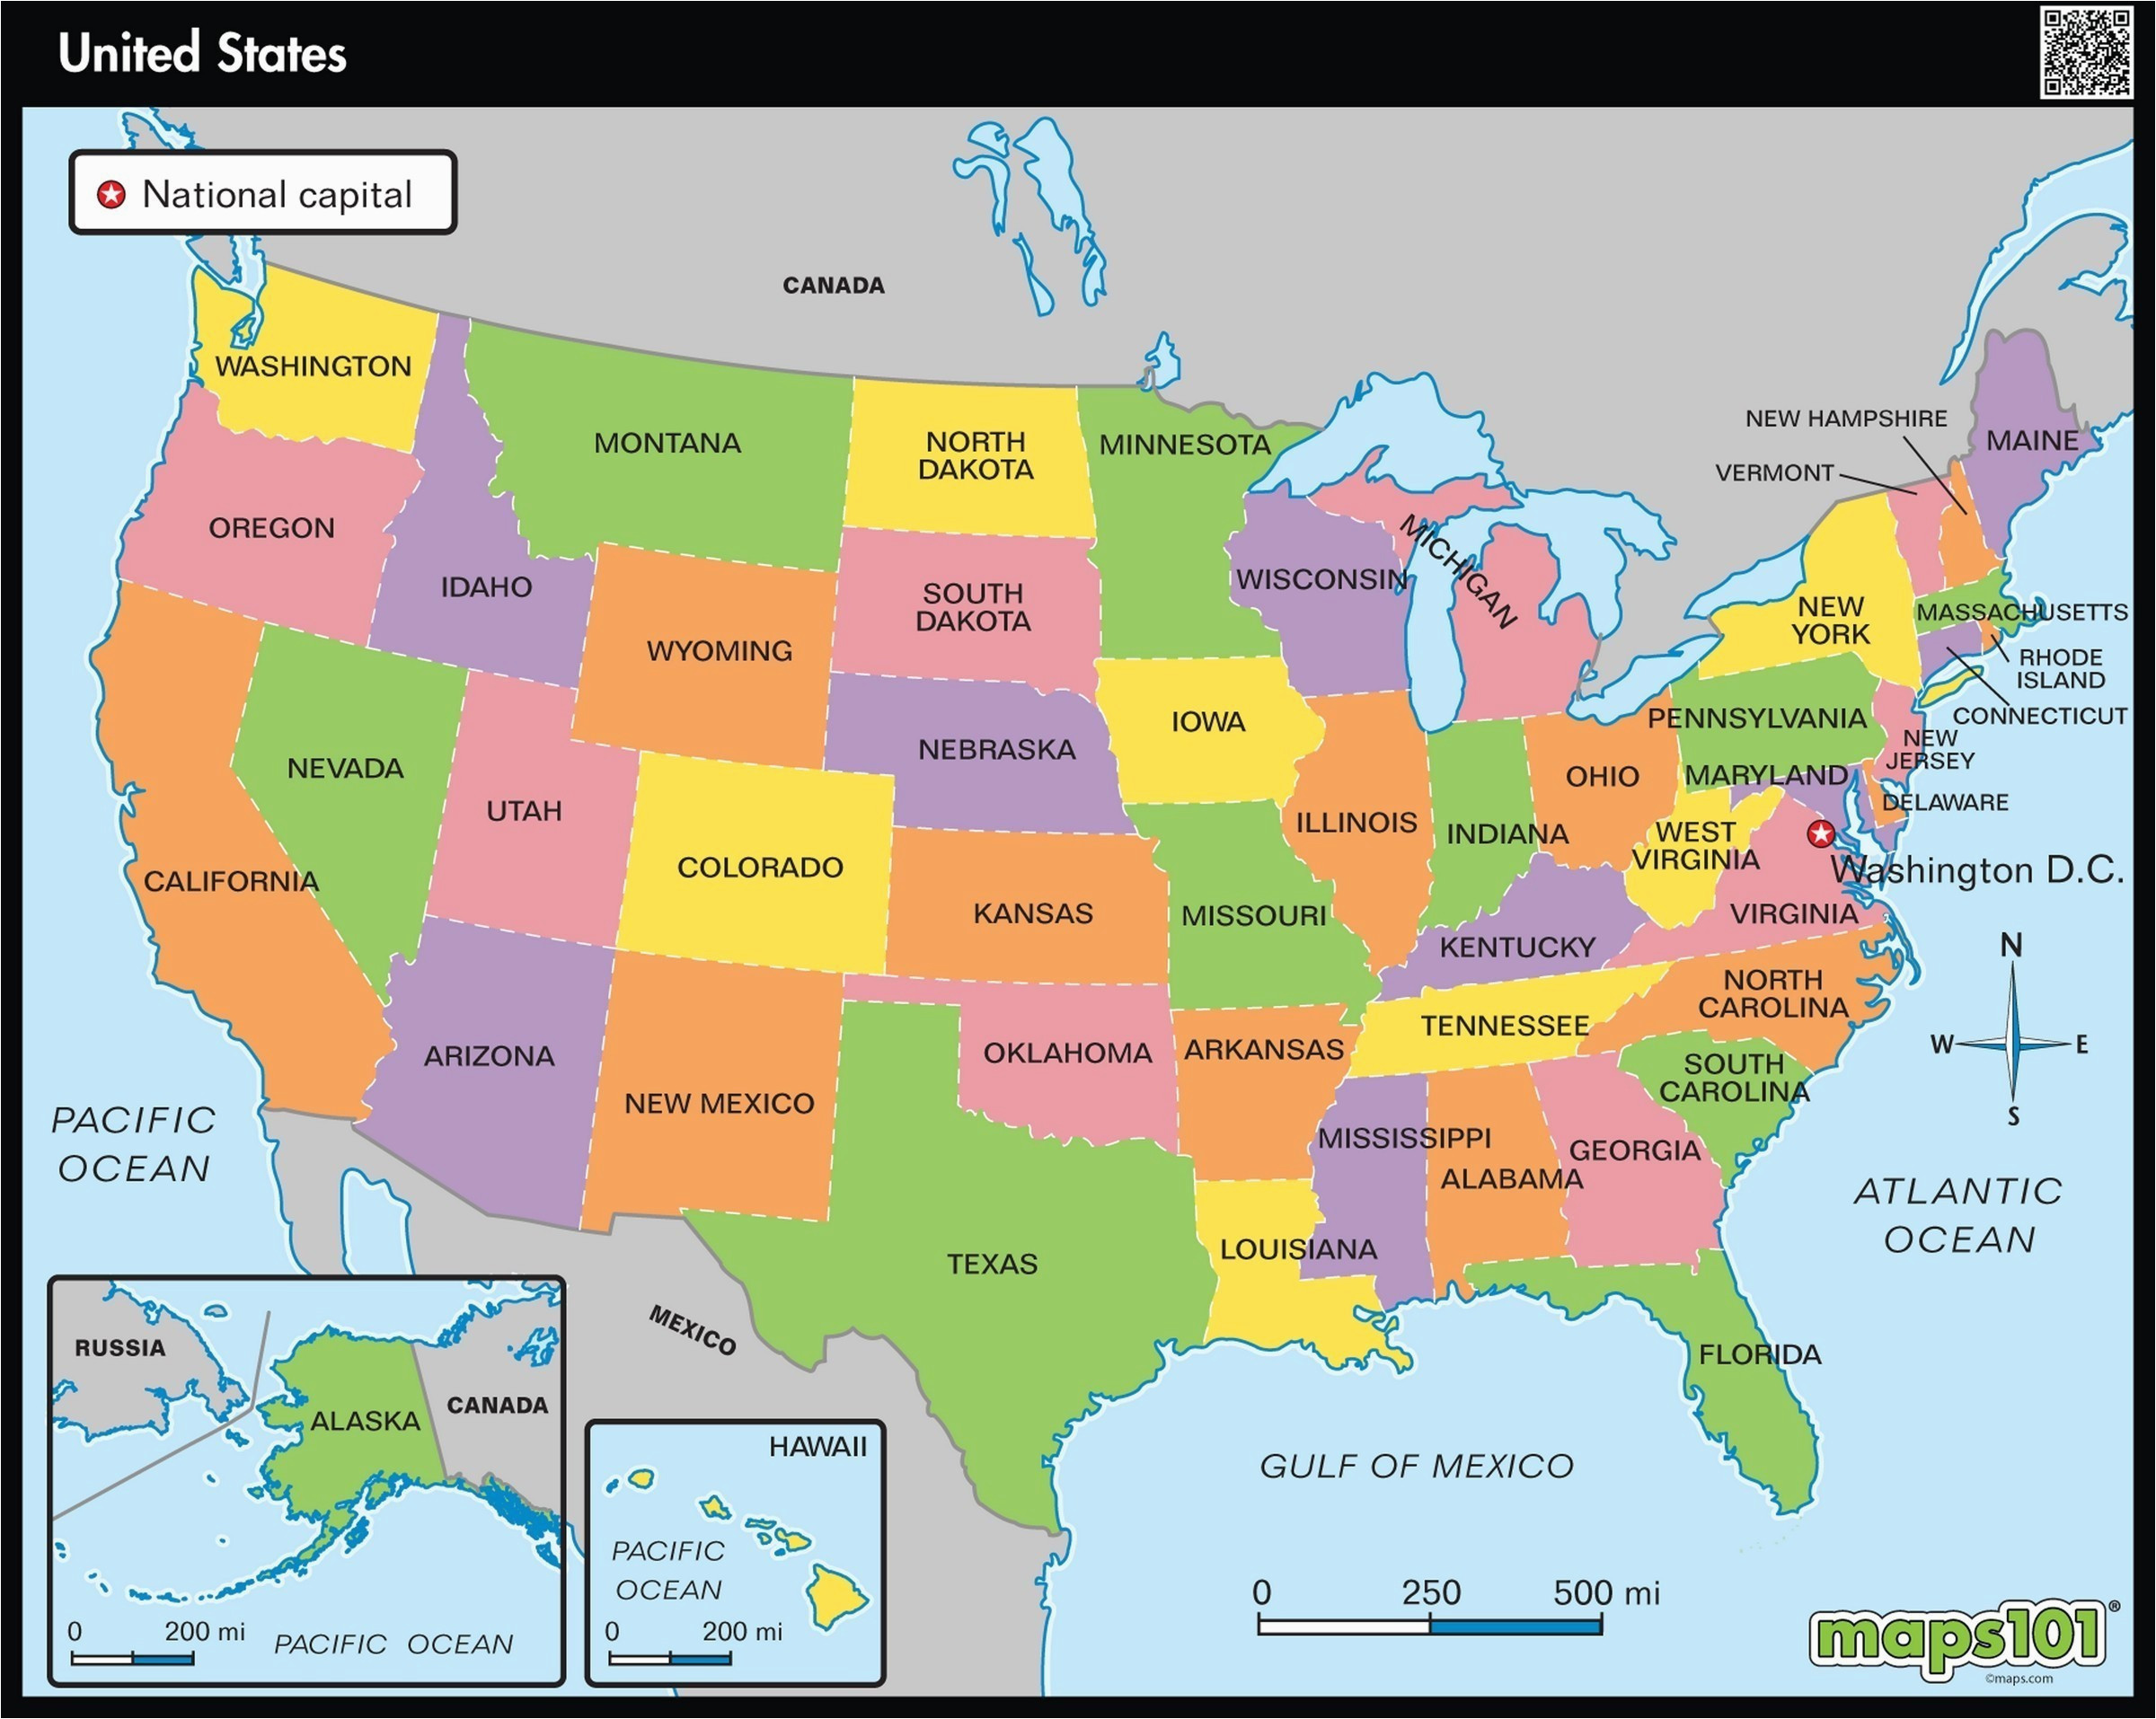 united states climate regions map new southeast region united states